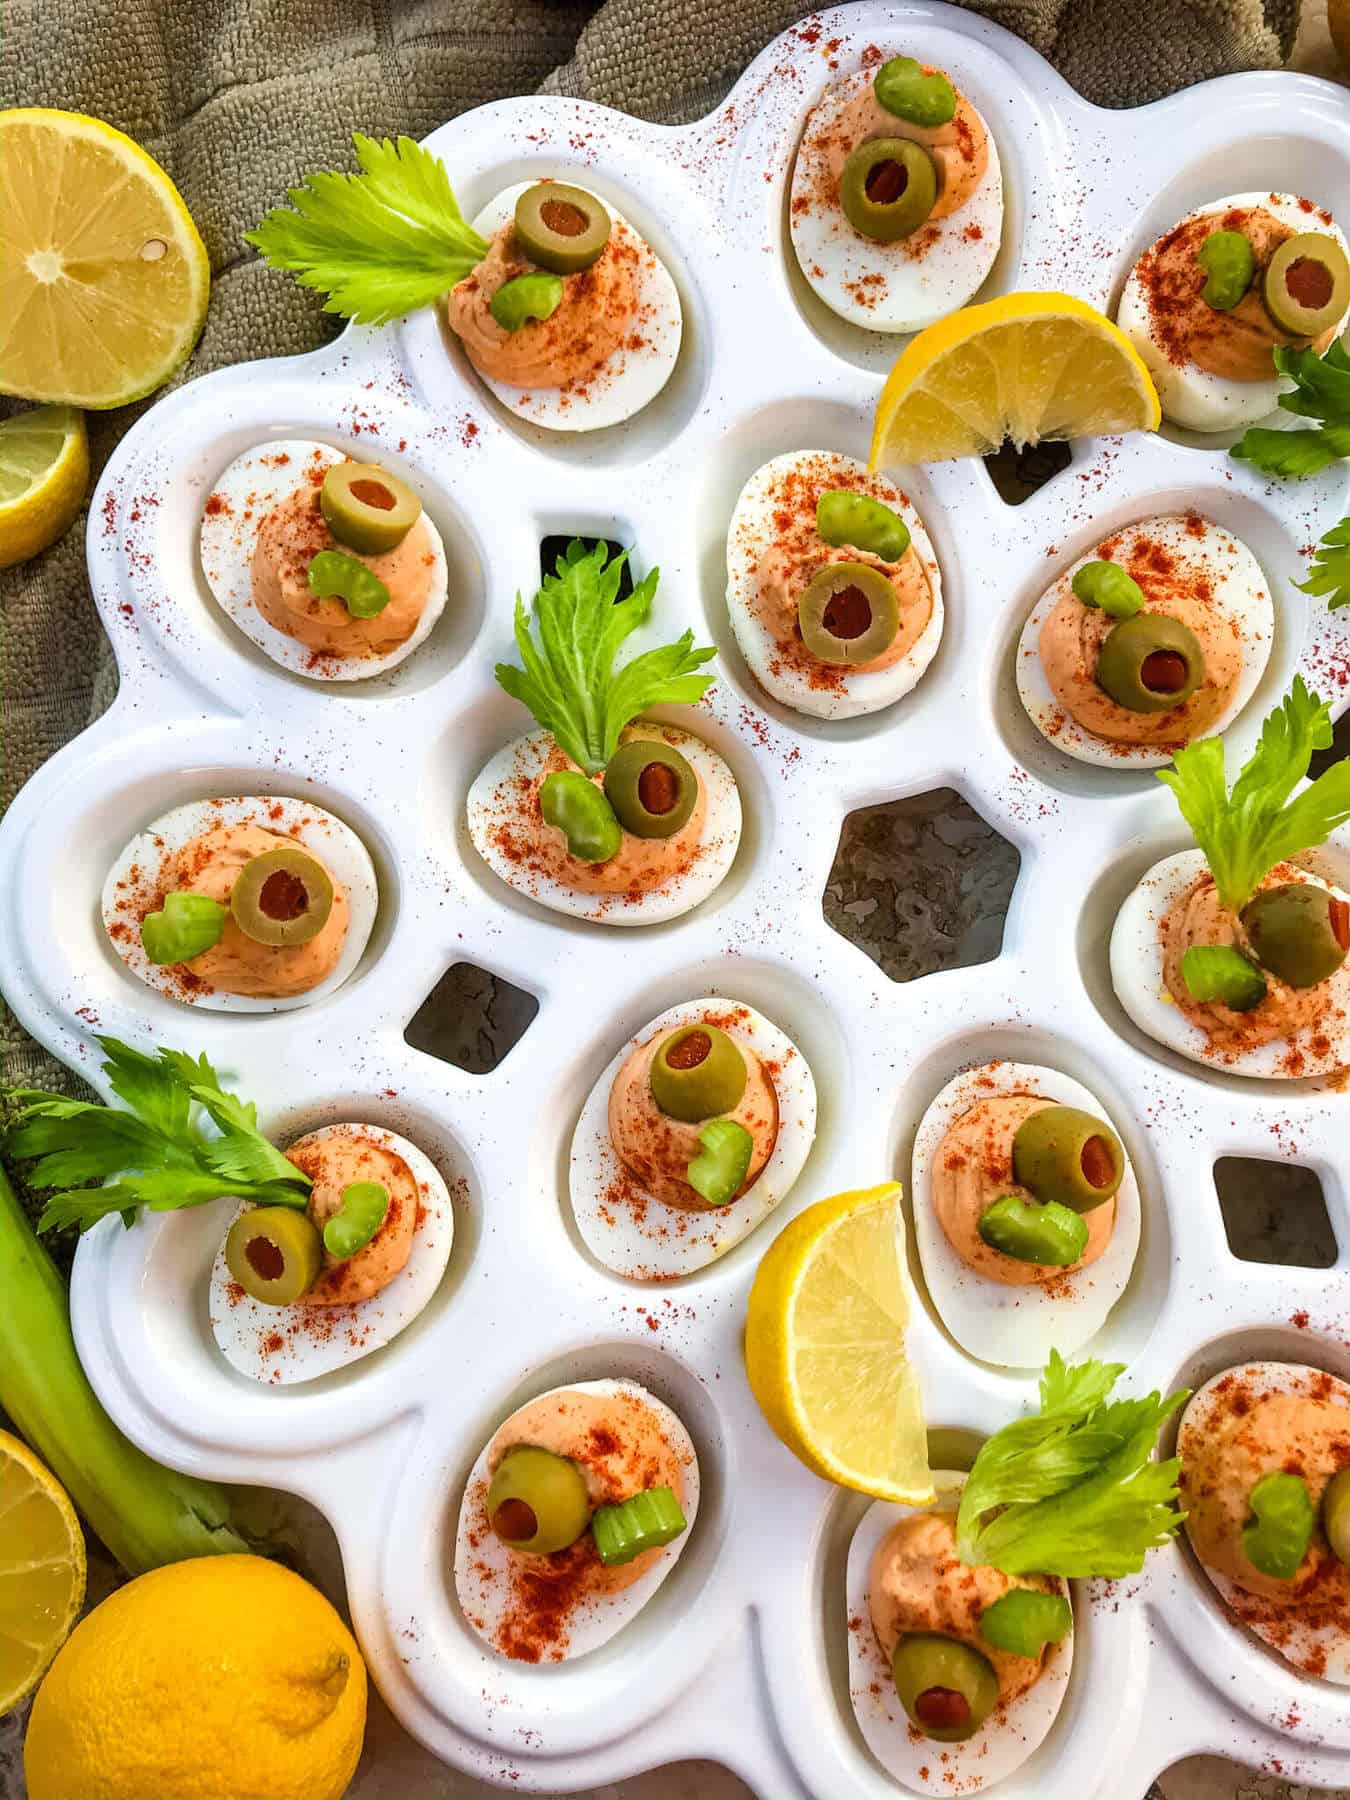 Bloody Mary deviled eggs topped with olives